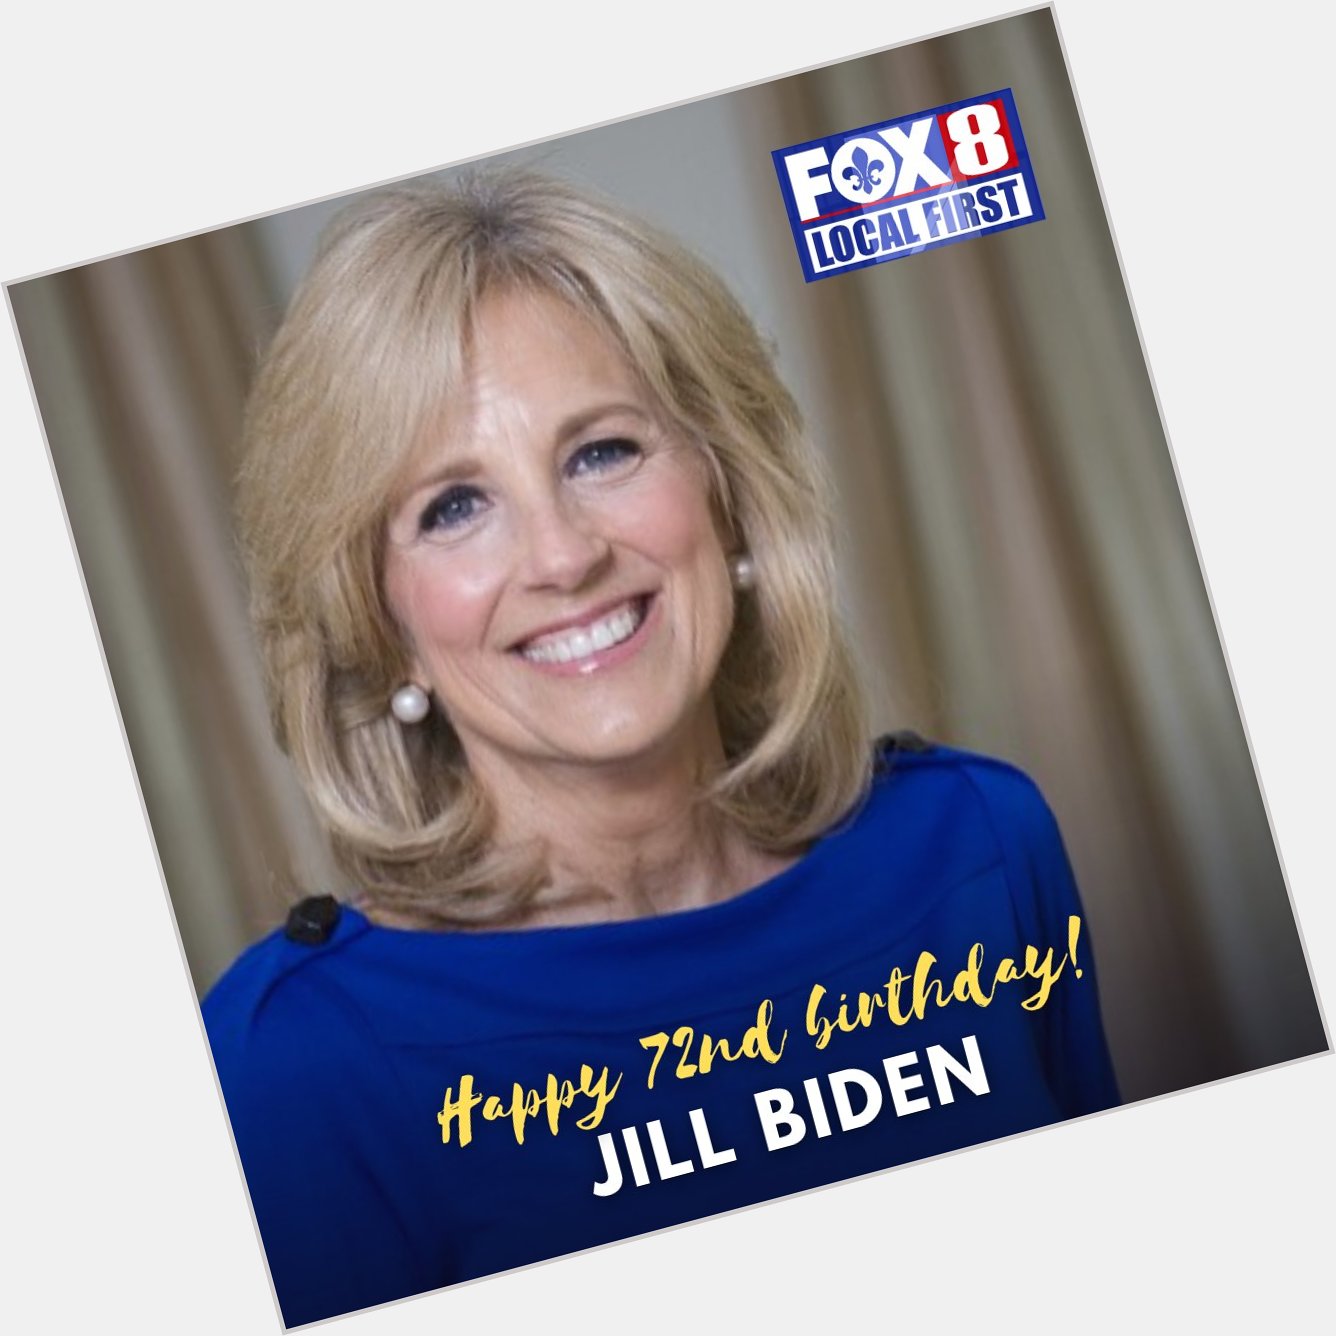 Happy birthday to Dr. Jill Biden! The First Lady turned 72 on Saturday! 